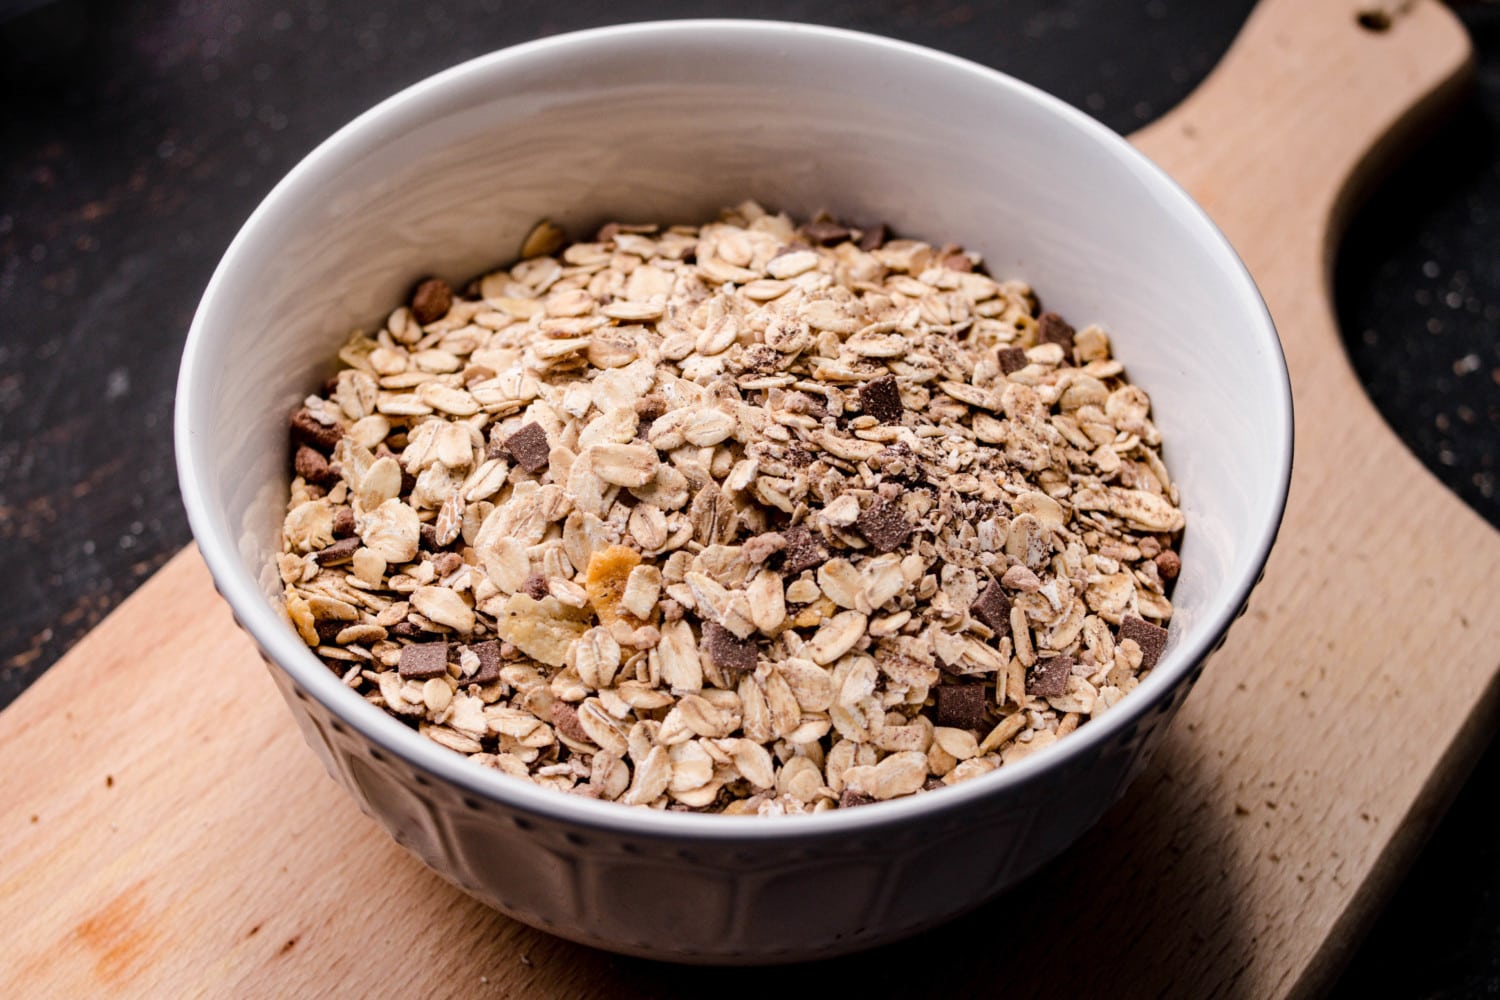 Oatmeal on the wooden background